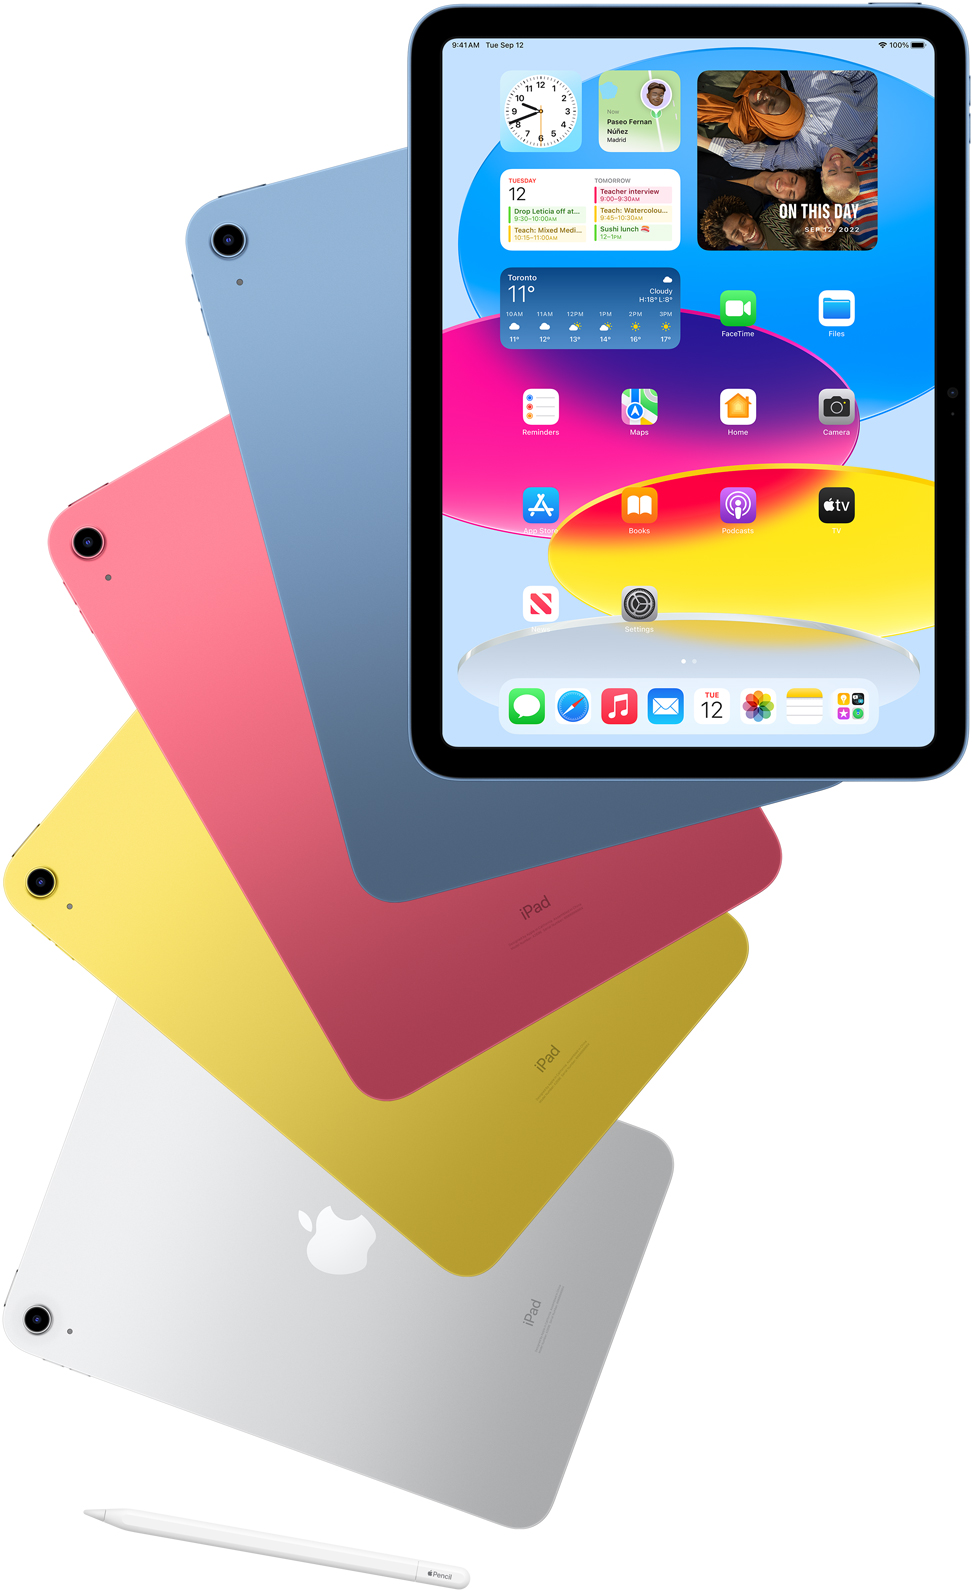 Front view iPad shows home screen with blue, pink, yellow and silver rear facing iPads behind it. An Apple Pencil sits near the arranged iPad models.